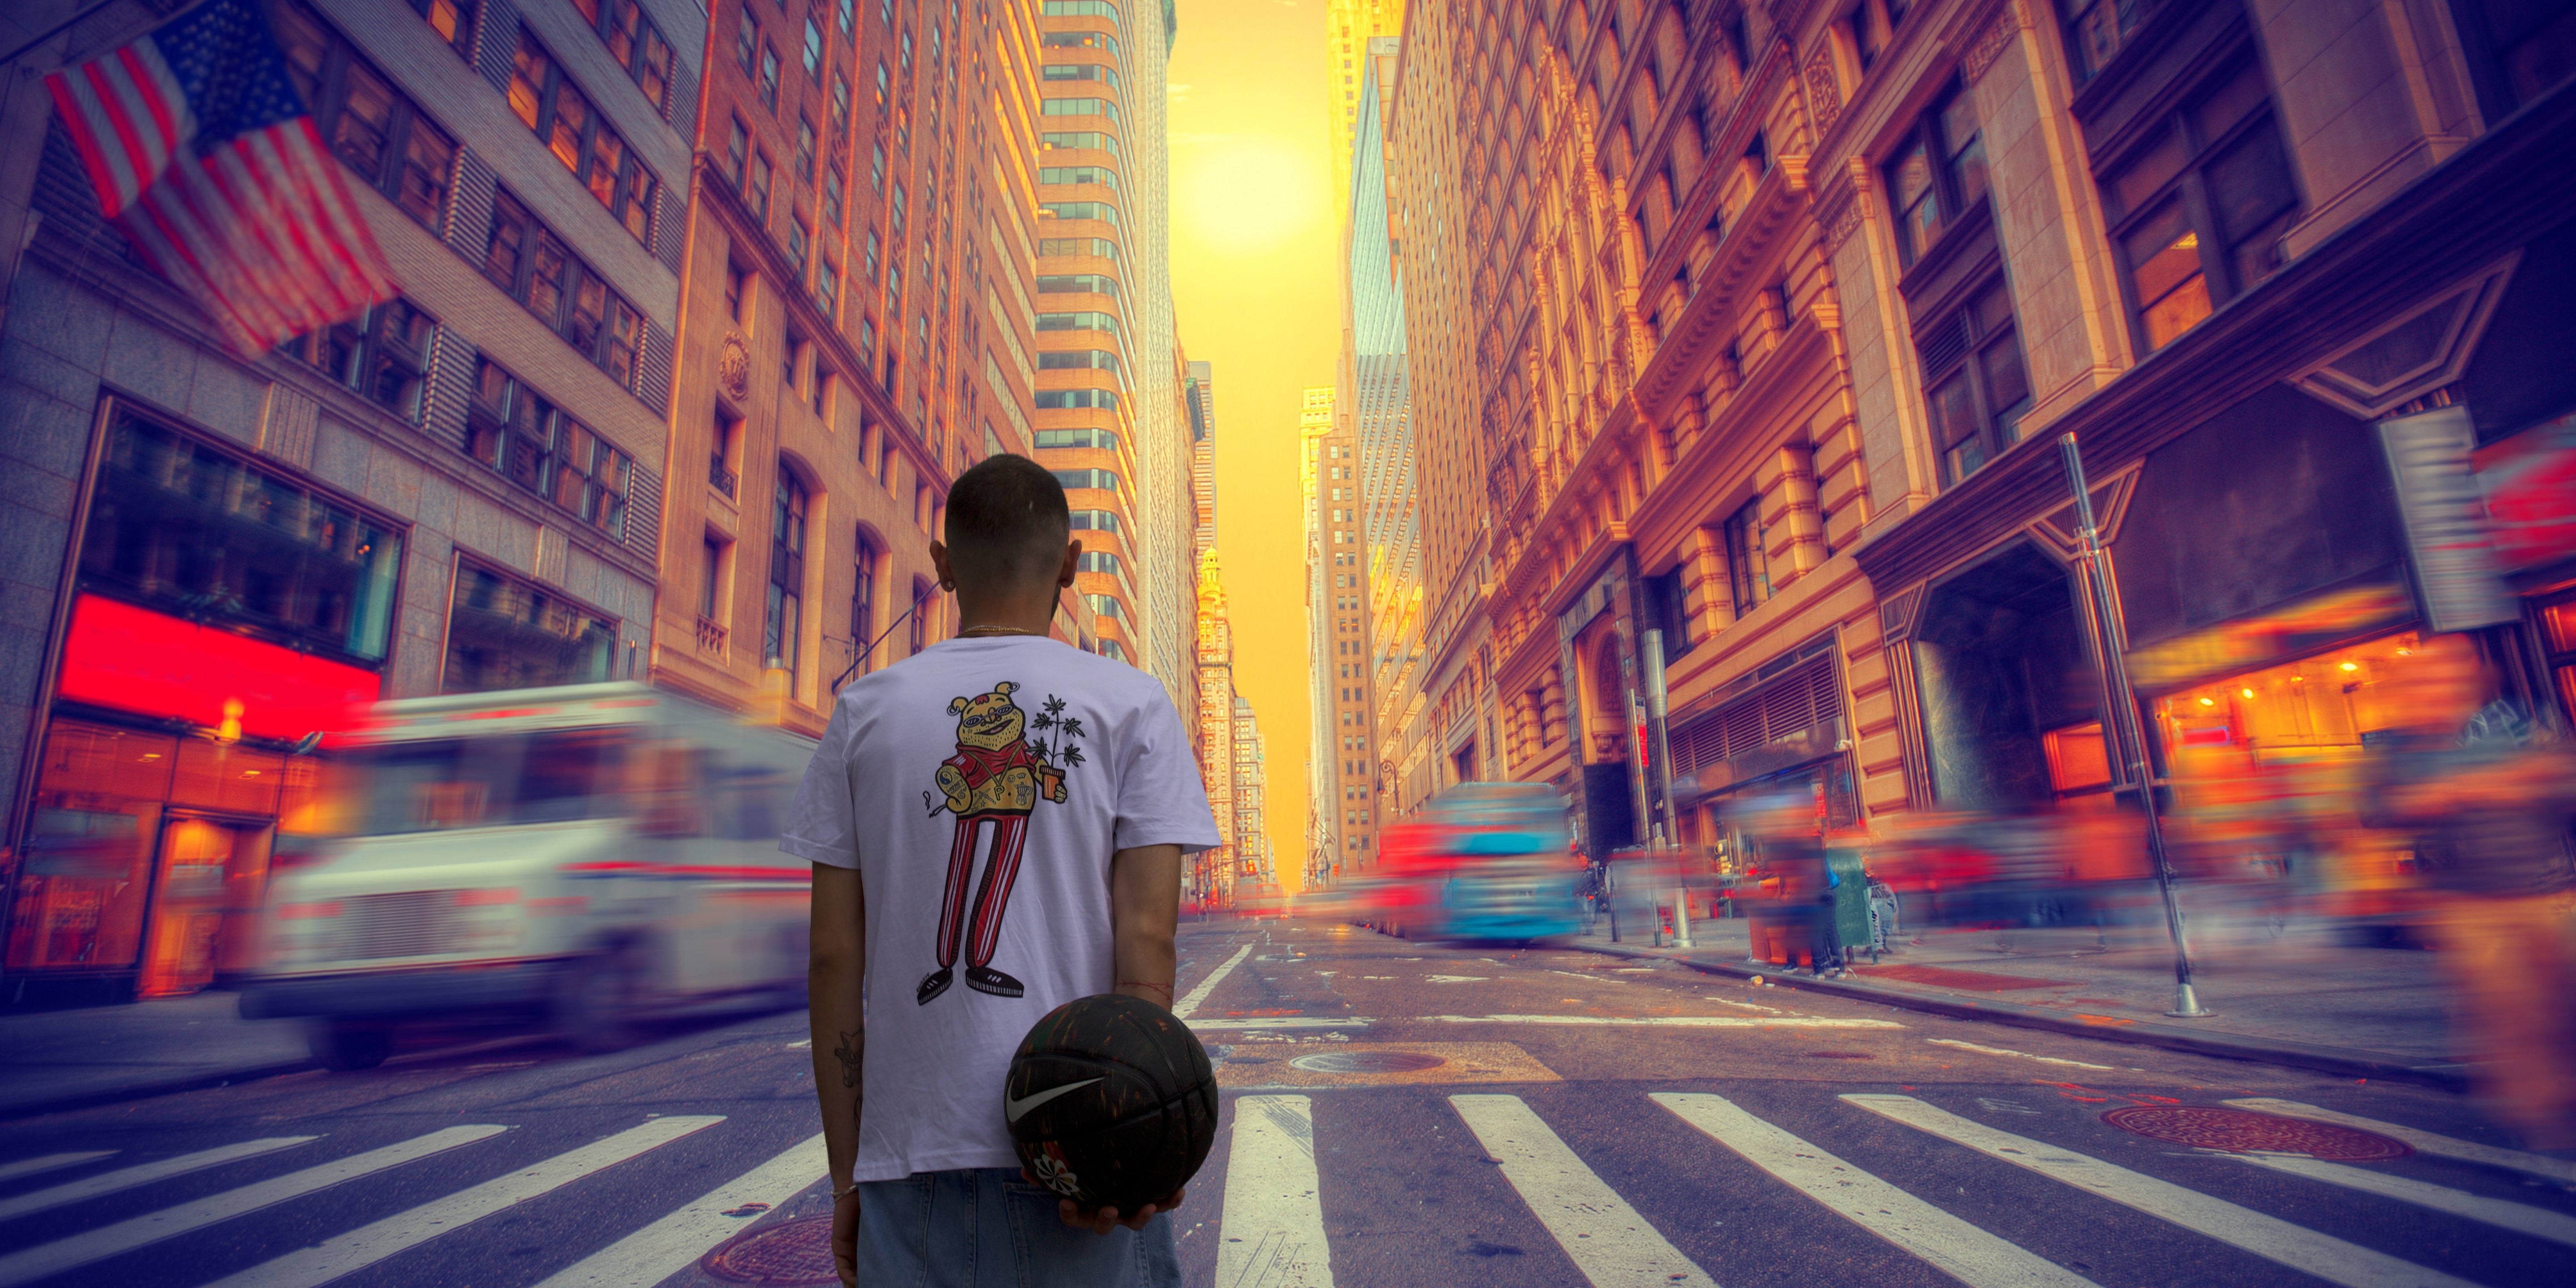 A man wearing a limited editionT-Shirt from 99things.ch carrying a basketball standing in the street of a city